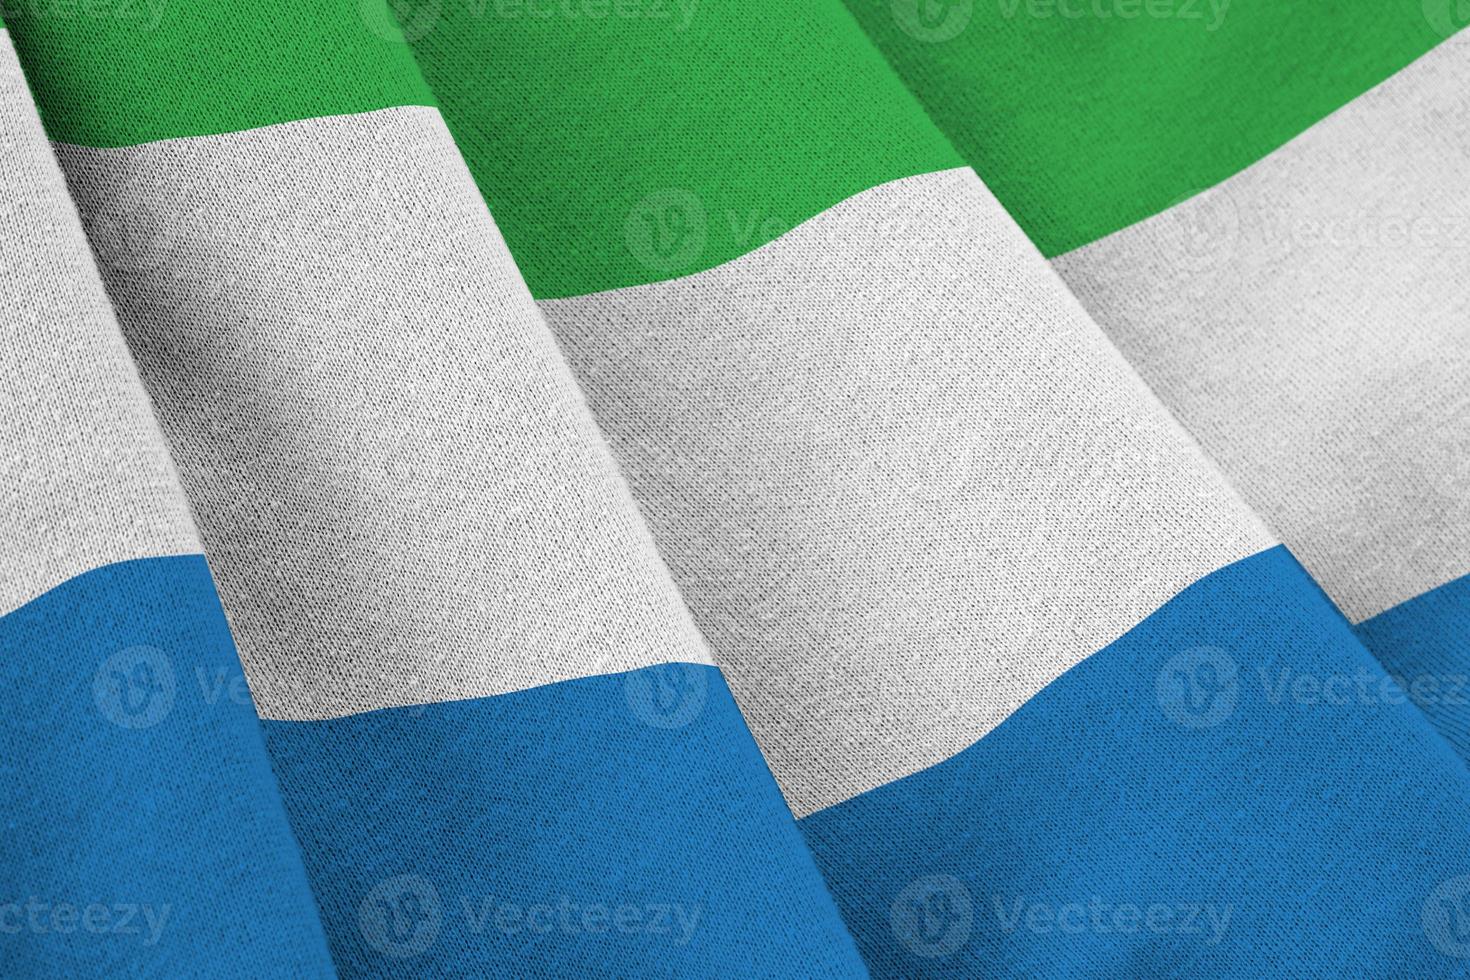 Sierra Leone flag with big folds waving close up under the studio light indoors. The official symbols and colors in banner photo